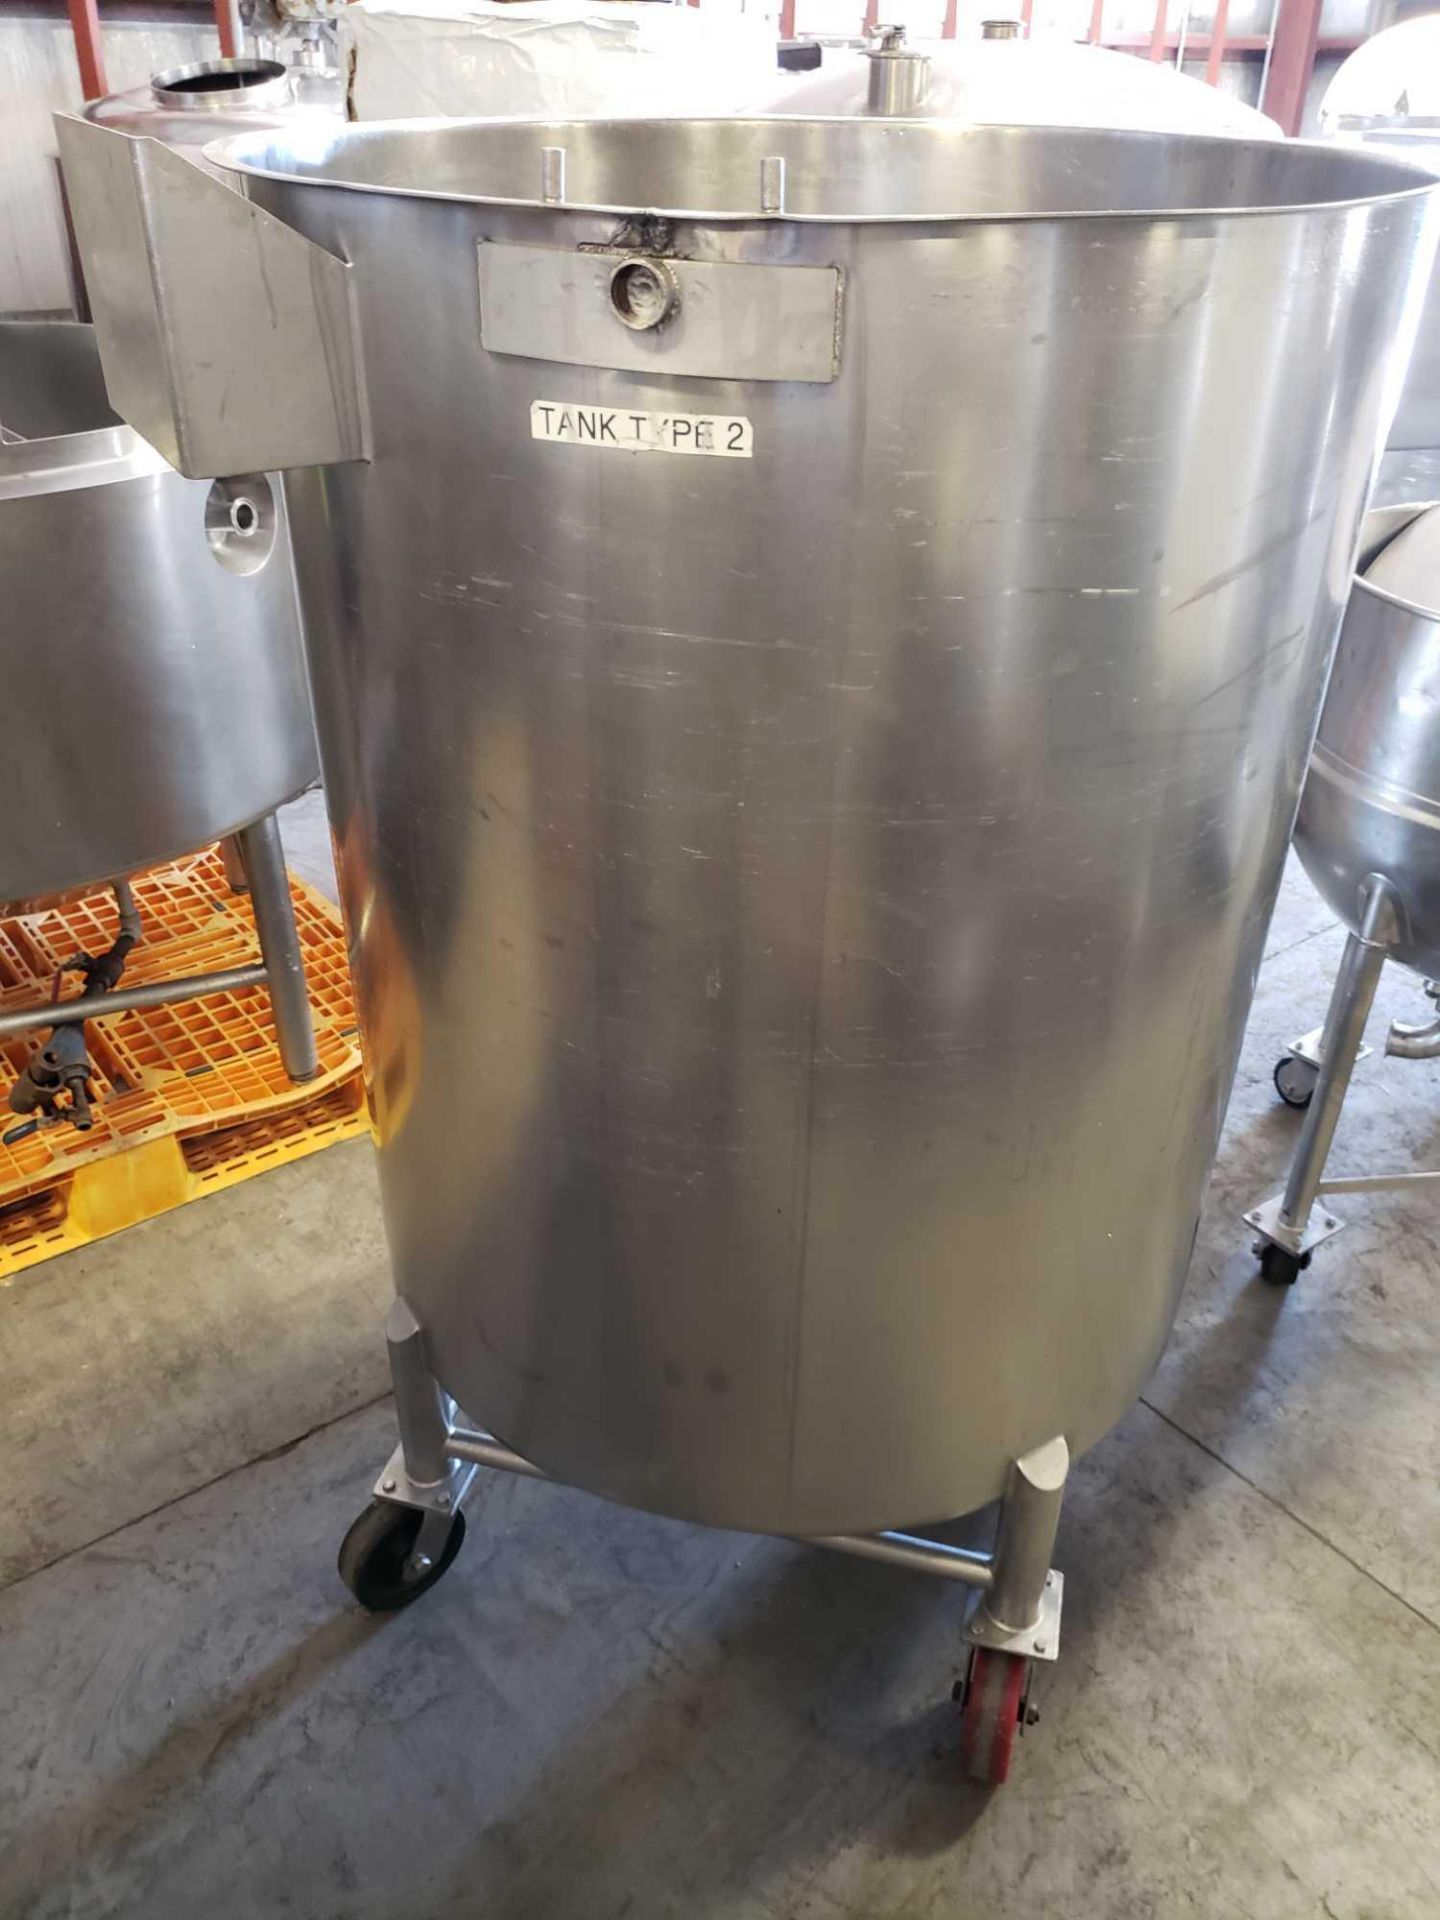 Stainless steel tank on casters. 40" diameter x 48" interior depth with lid inside. Est 250 gallon - Image 3 of 6